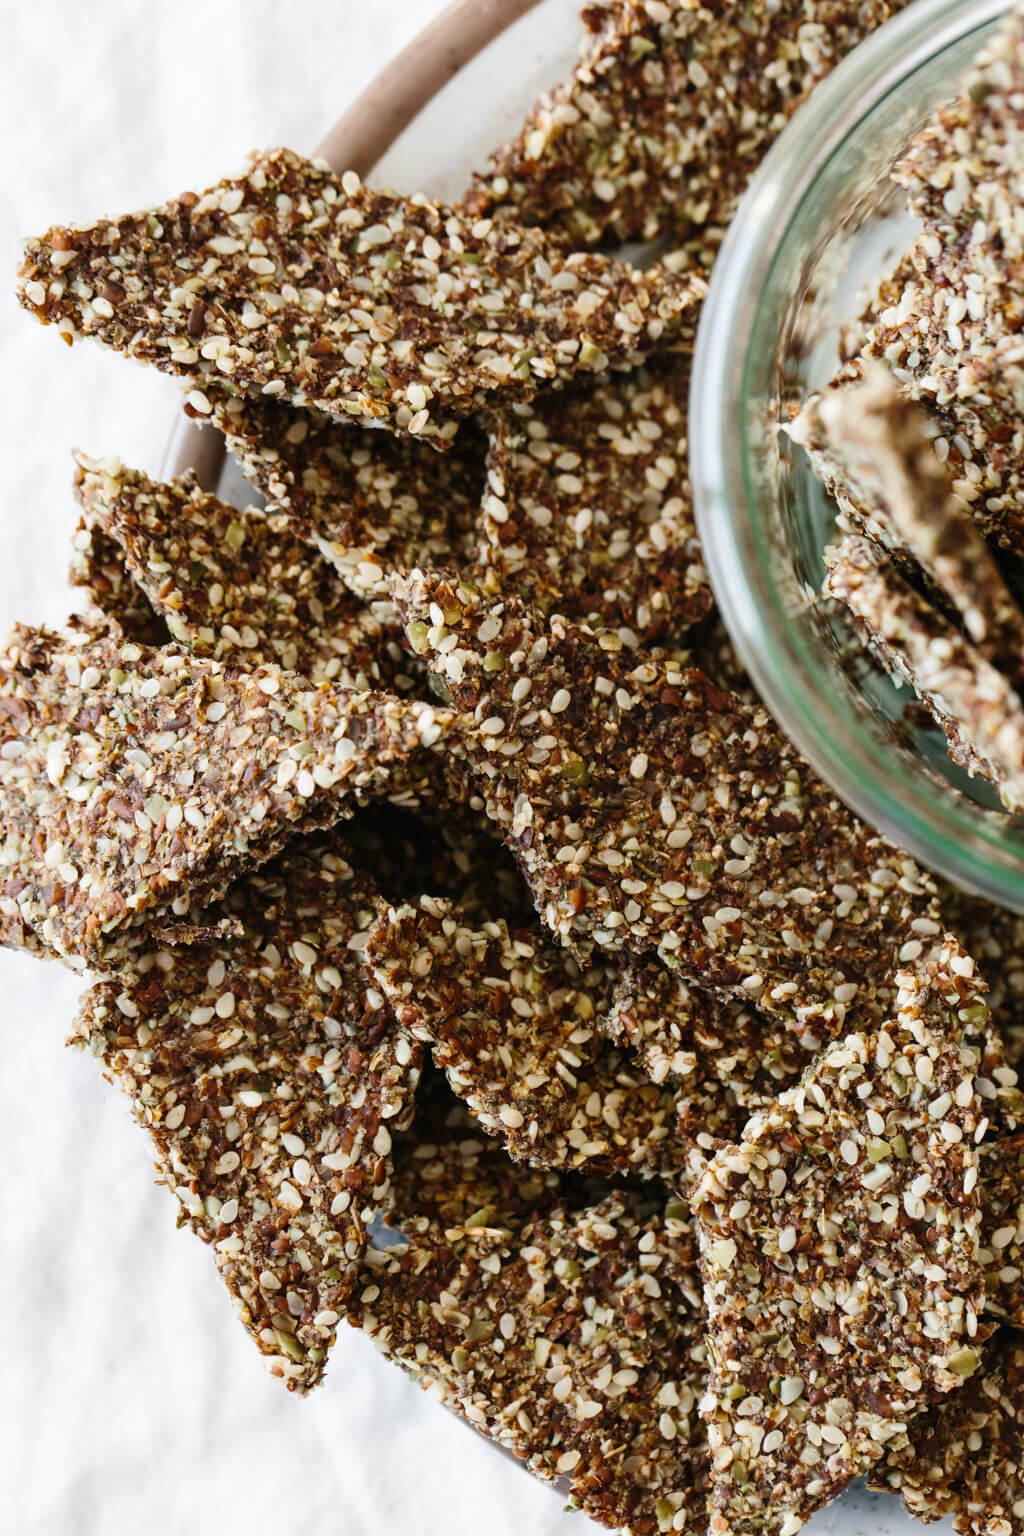 Flax seed crackers are a crunchy, flavorful, homemade cracker recipe that's naturally gluten-free, grain-free, nut-free, paleo and vegan. Made from flax seeds, chia seeds, sesame seeds and pumpkin seeds, they're super easy to make and great for snacking.